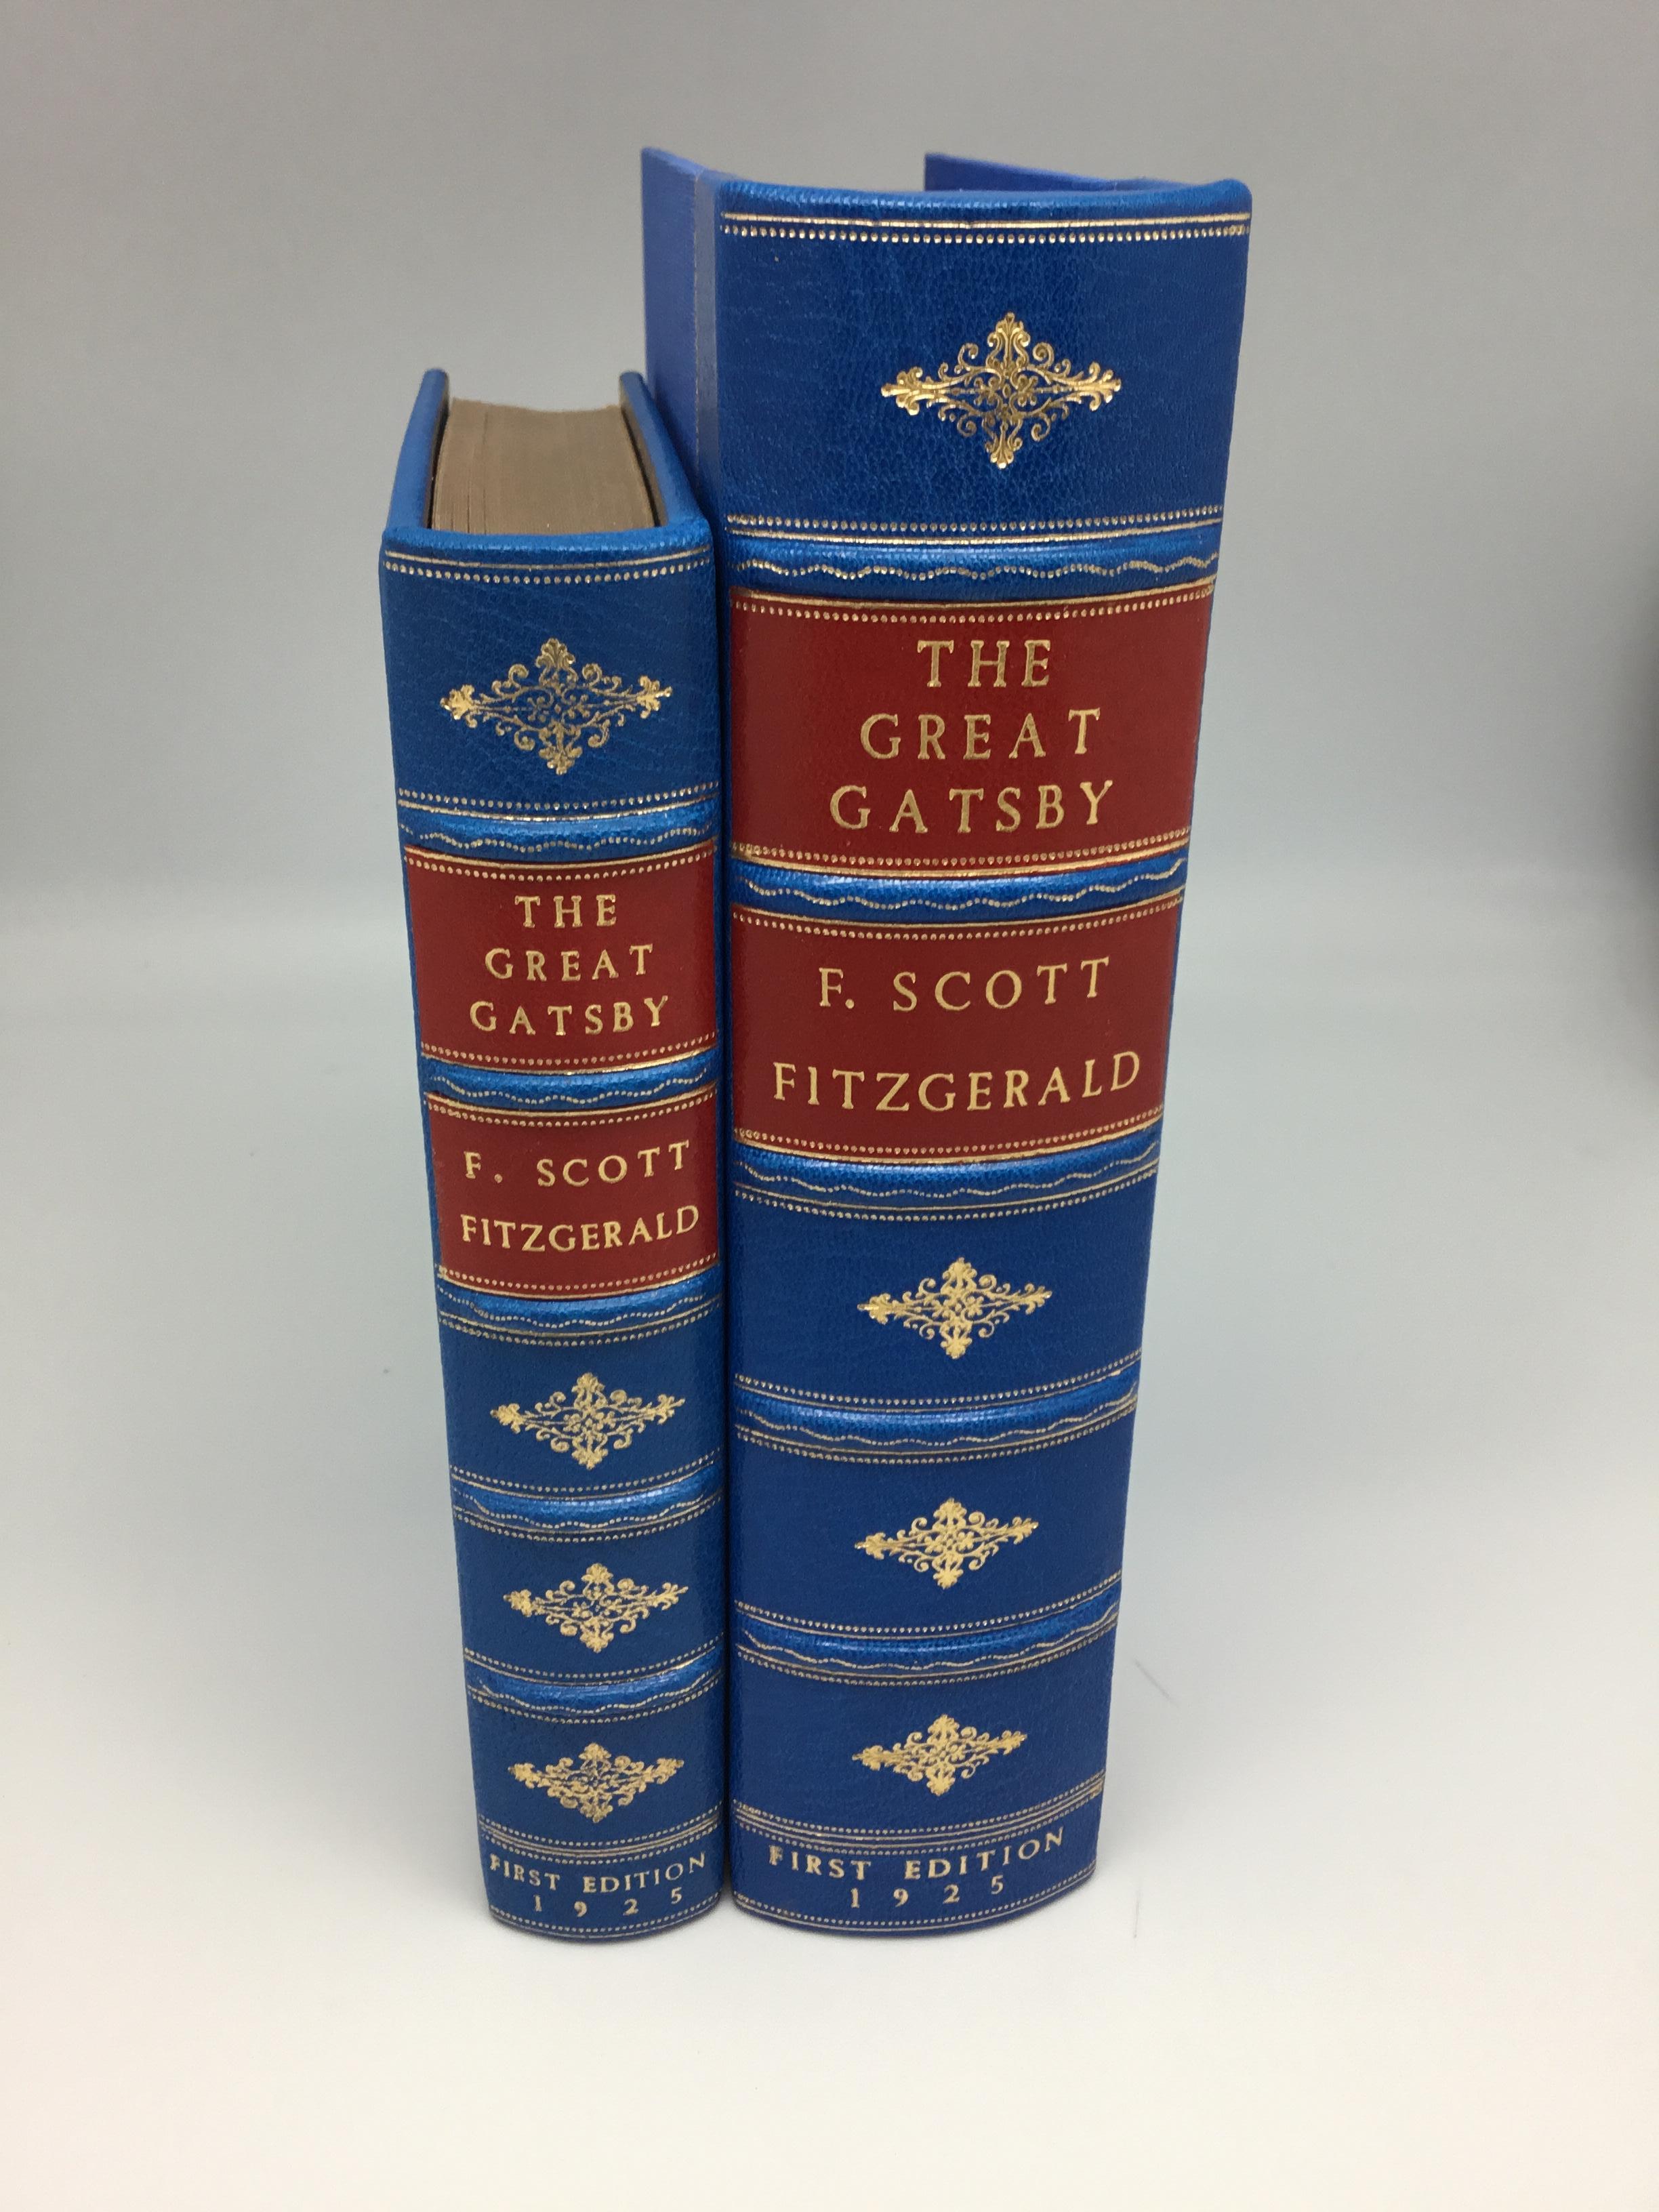 First edition, first issue of F. Scott Fitzgerald’s The Great Gatsby, a landmark of 20th century fiction. This haunting tale of 